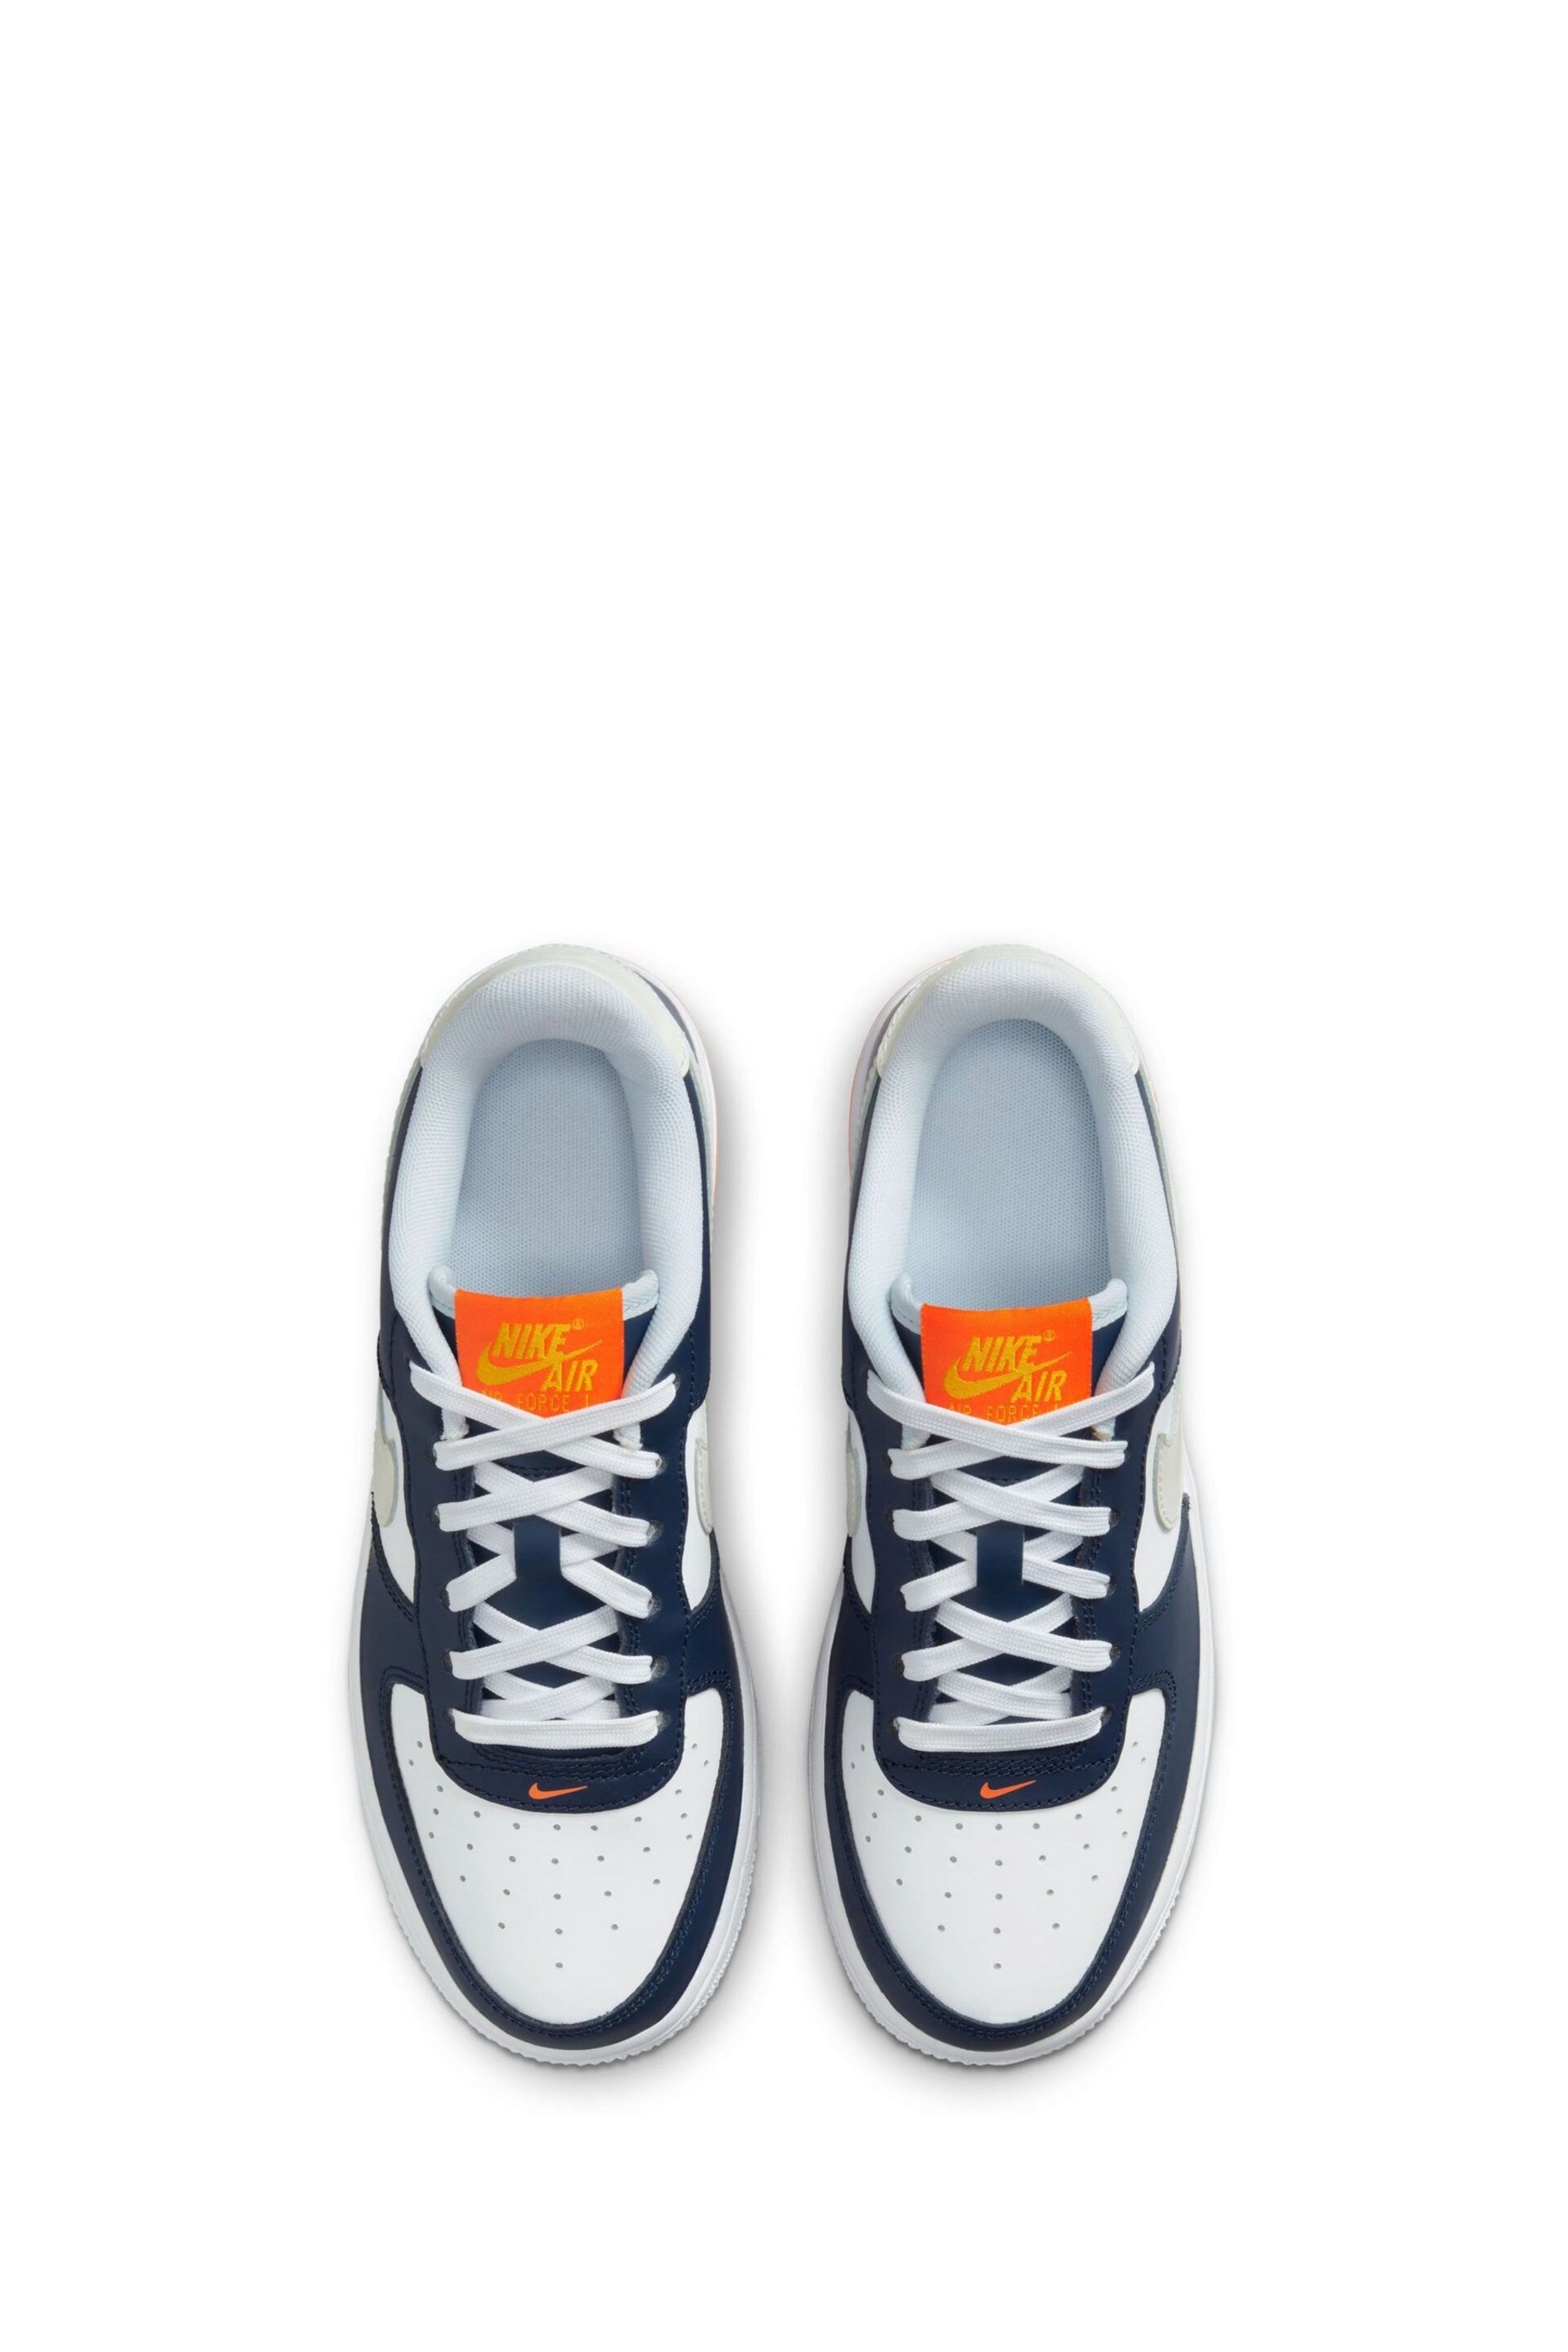 Nike Blue Air Force 1 LV8 2  Youth Trainers - Image 6 of 12